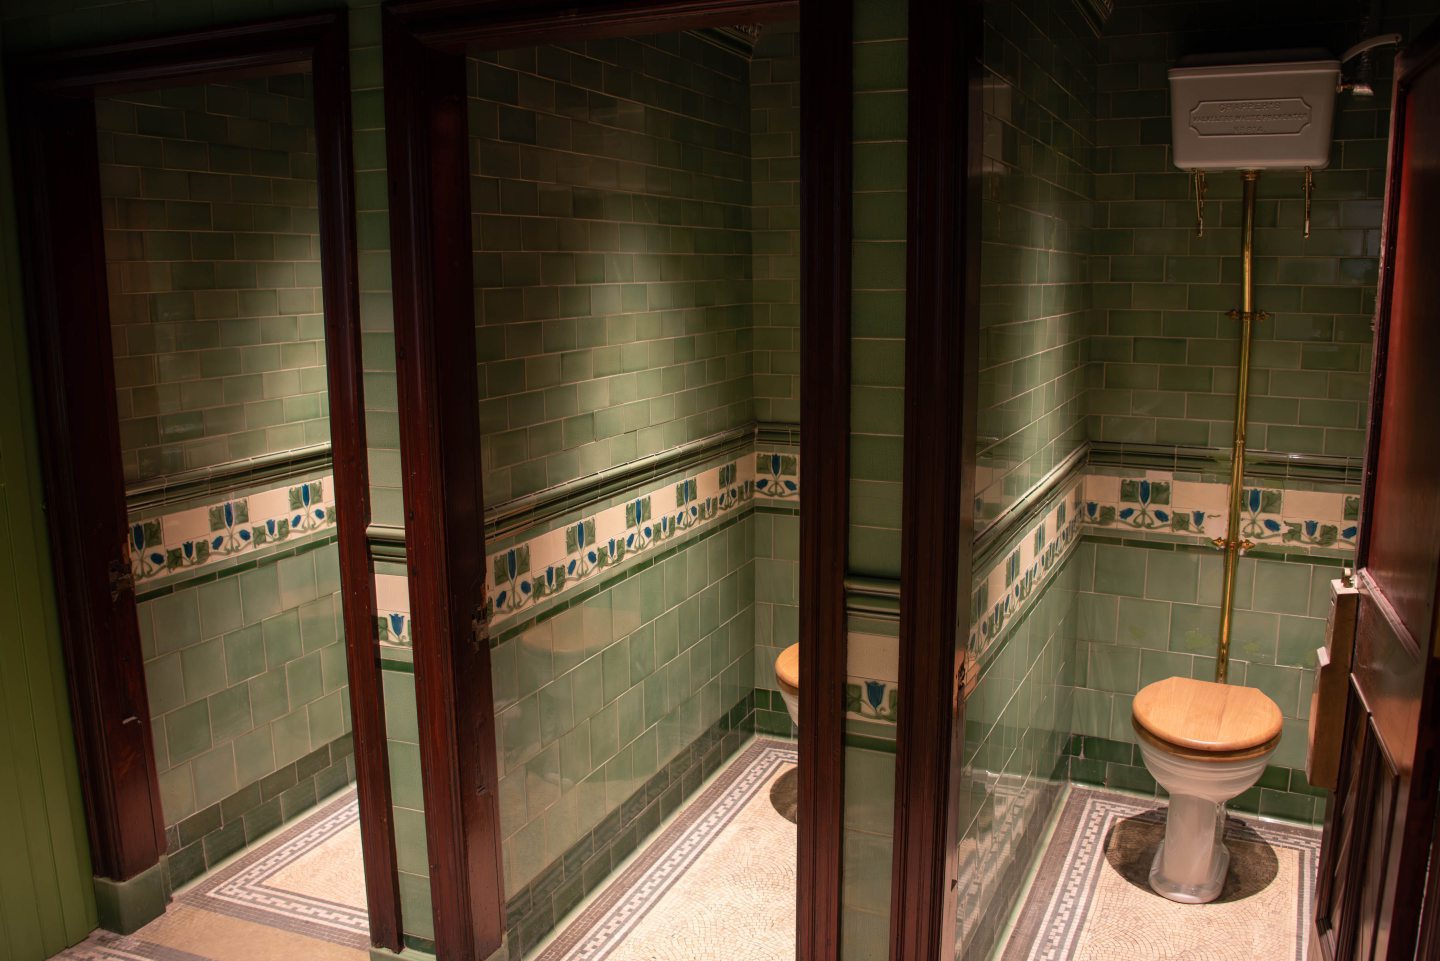 Cubicles in the toilets at Union Square Gardens with intricate wall and floor tiling.